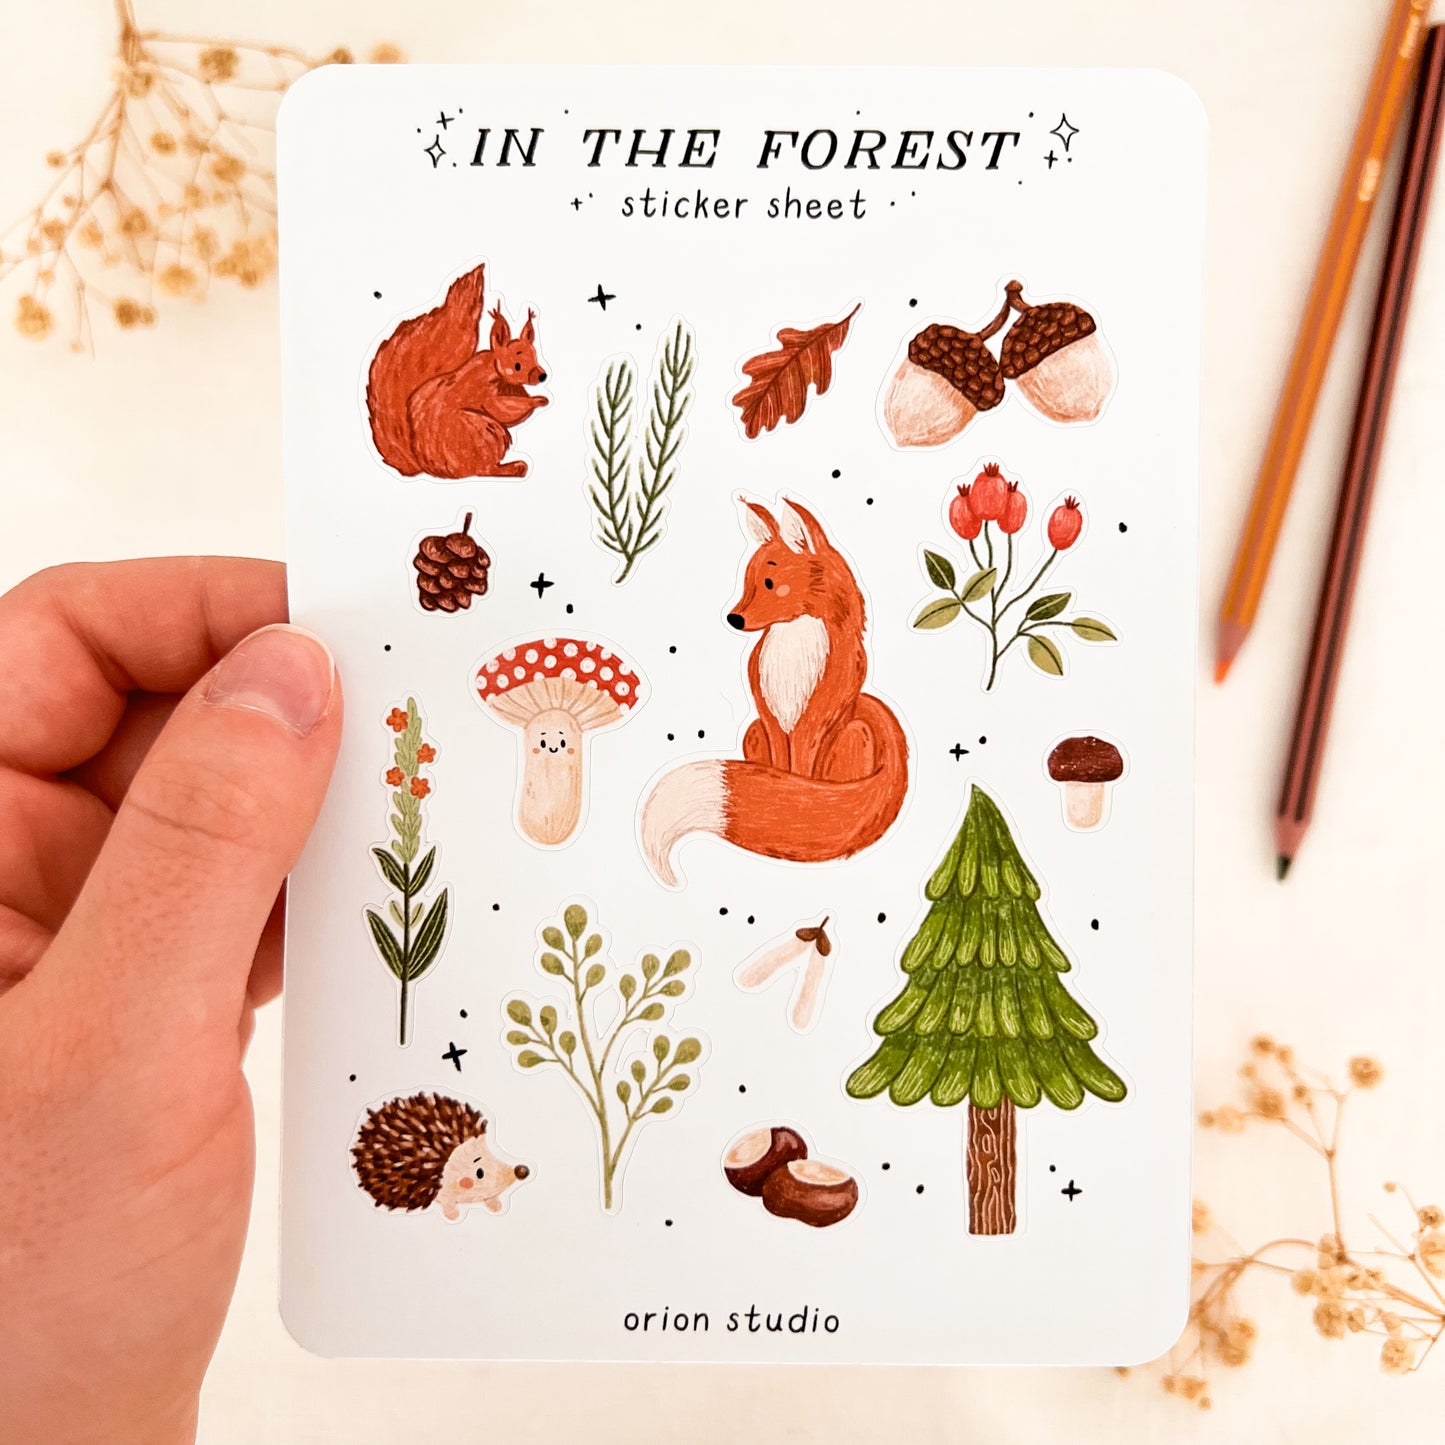 'IN THE FOREST' sticker sheet